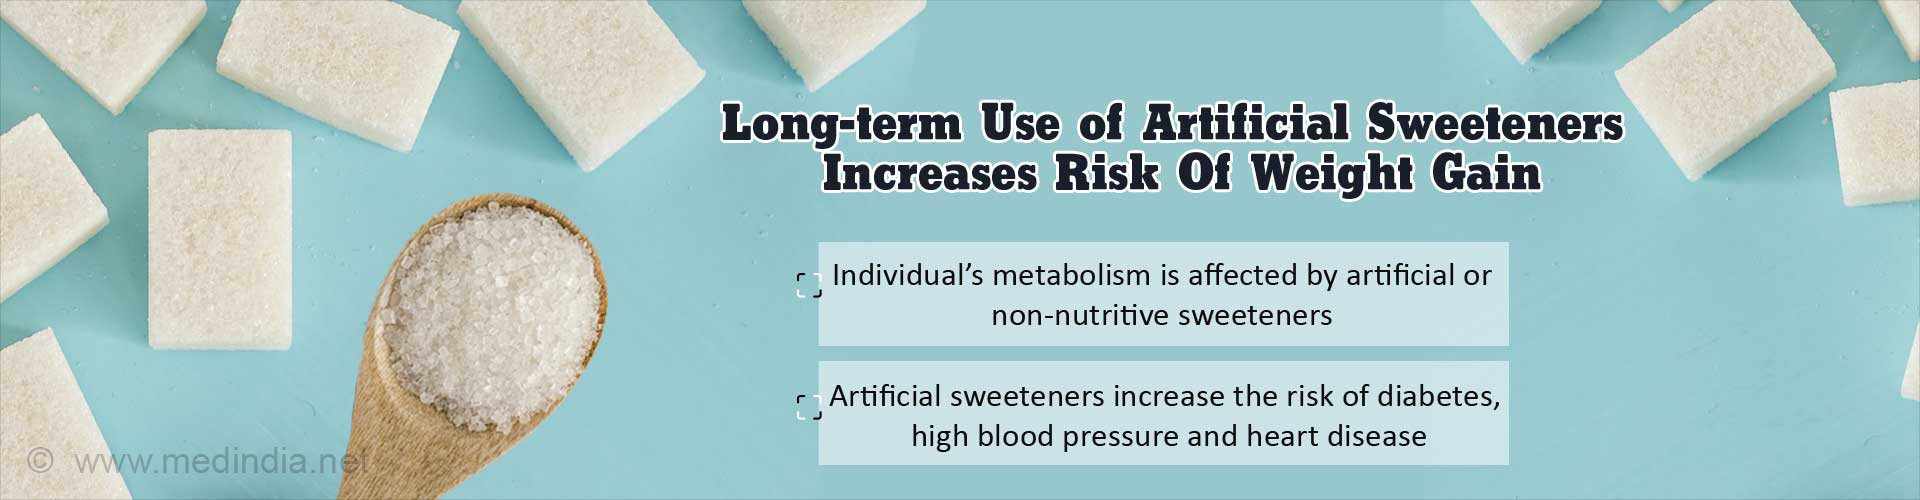 Long-term use of artificial sweeteners increases risk of weight gain
- Individual's metabolism is affected by artificial or non-nutritive sweeteners
- Artificial sweeteners increase the risk diabetes, high blood pressure and heart disease
